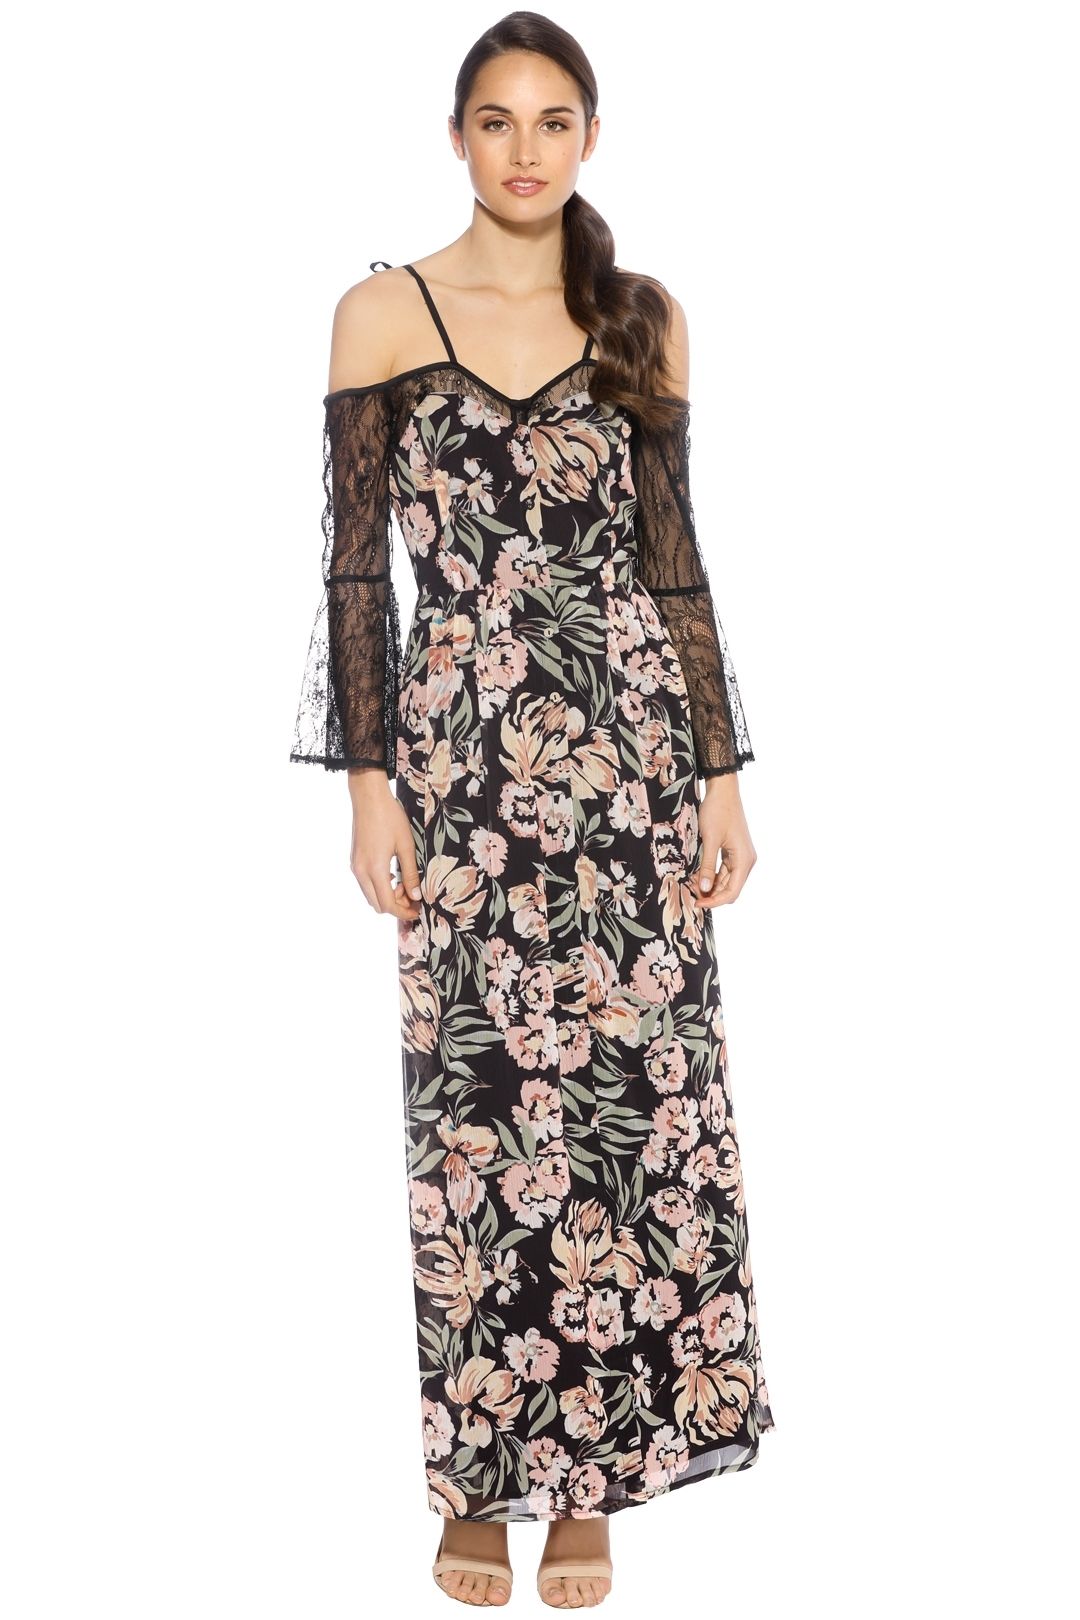 We Are Kindred - Jojo Lace Insert Dress - Floral Black - Front